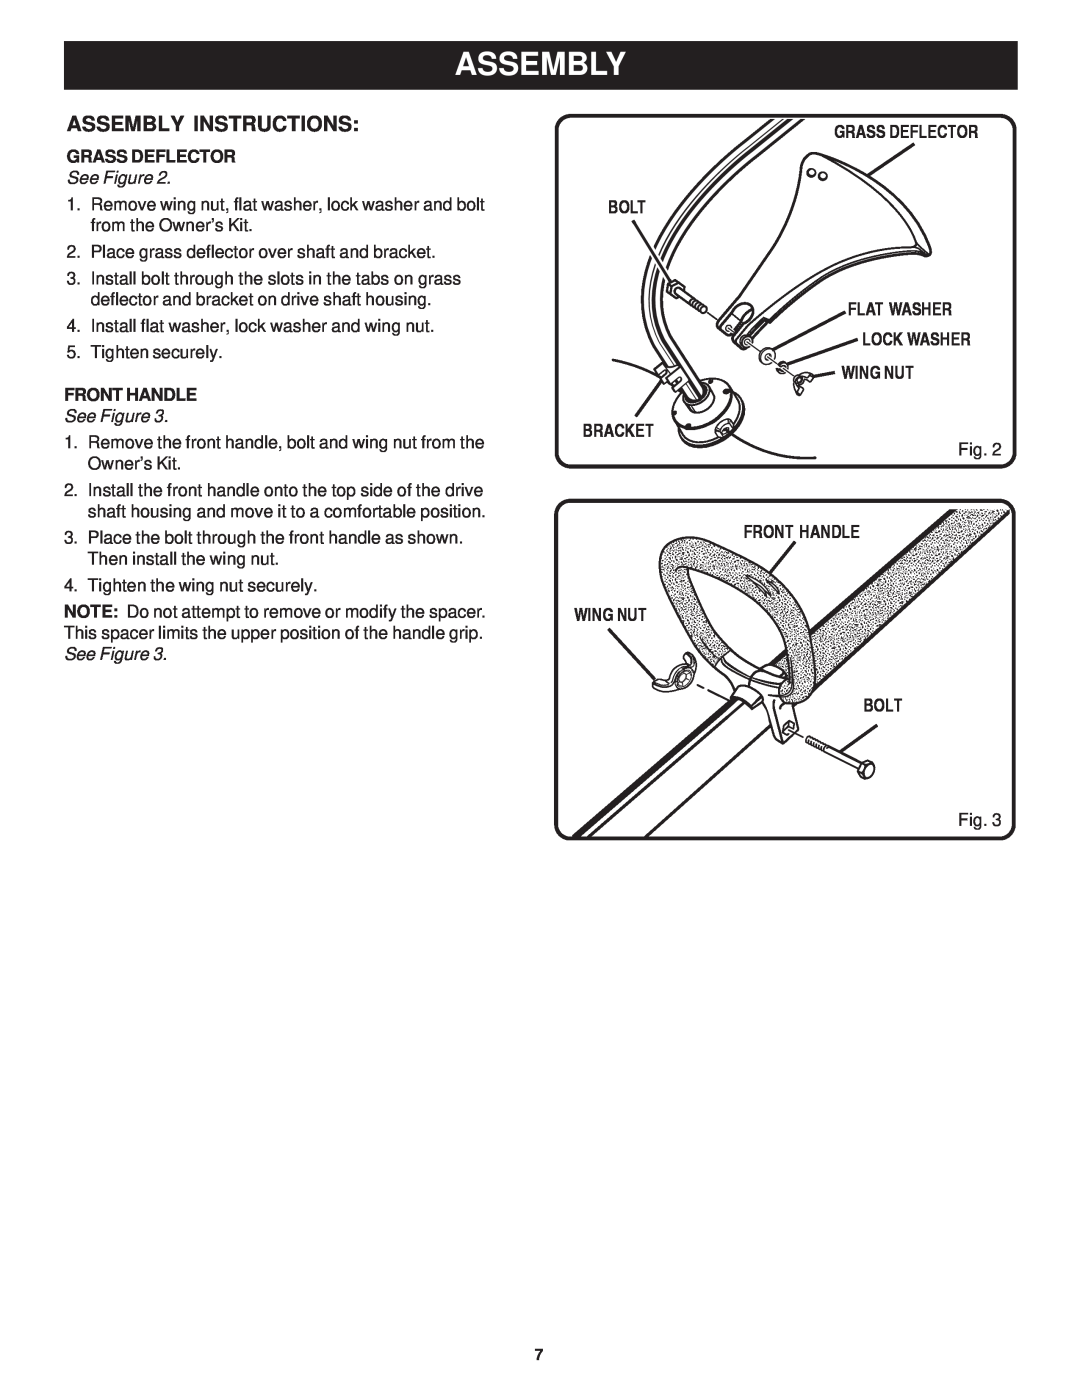 Ryobi Outdoor RPT2543C, RY7011 Assembly Instructions, Grass Deflector, See Figure, Front Handle, Wing Nut Bracket 